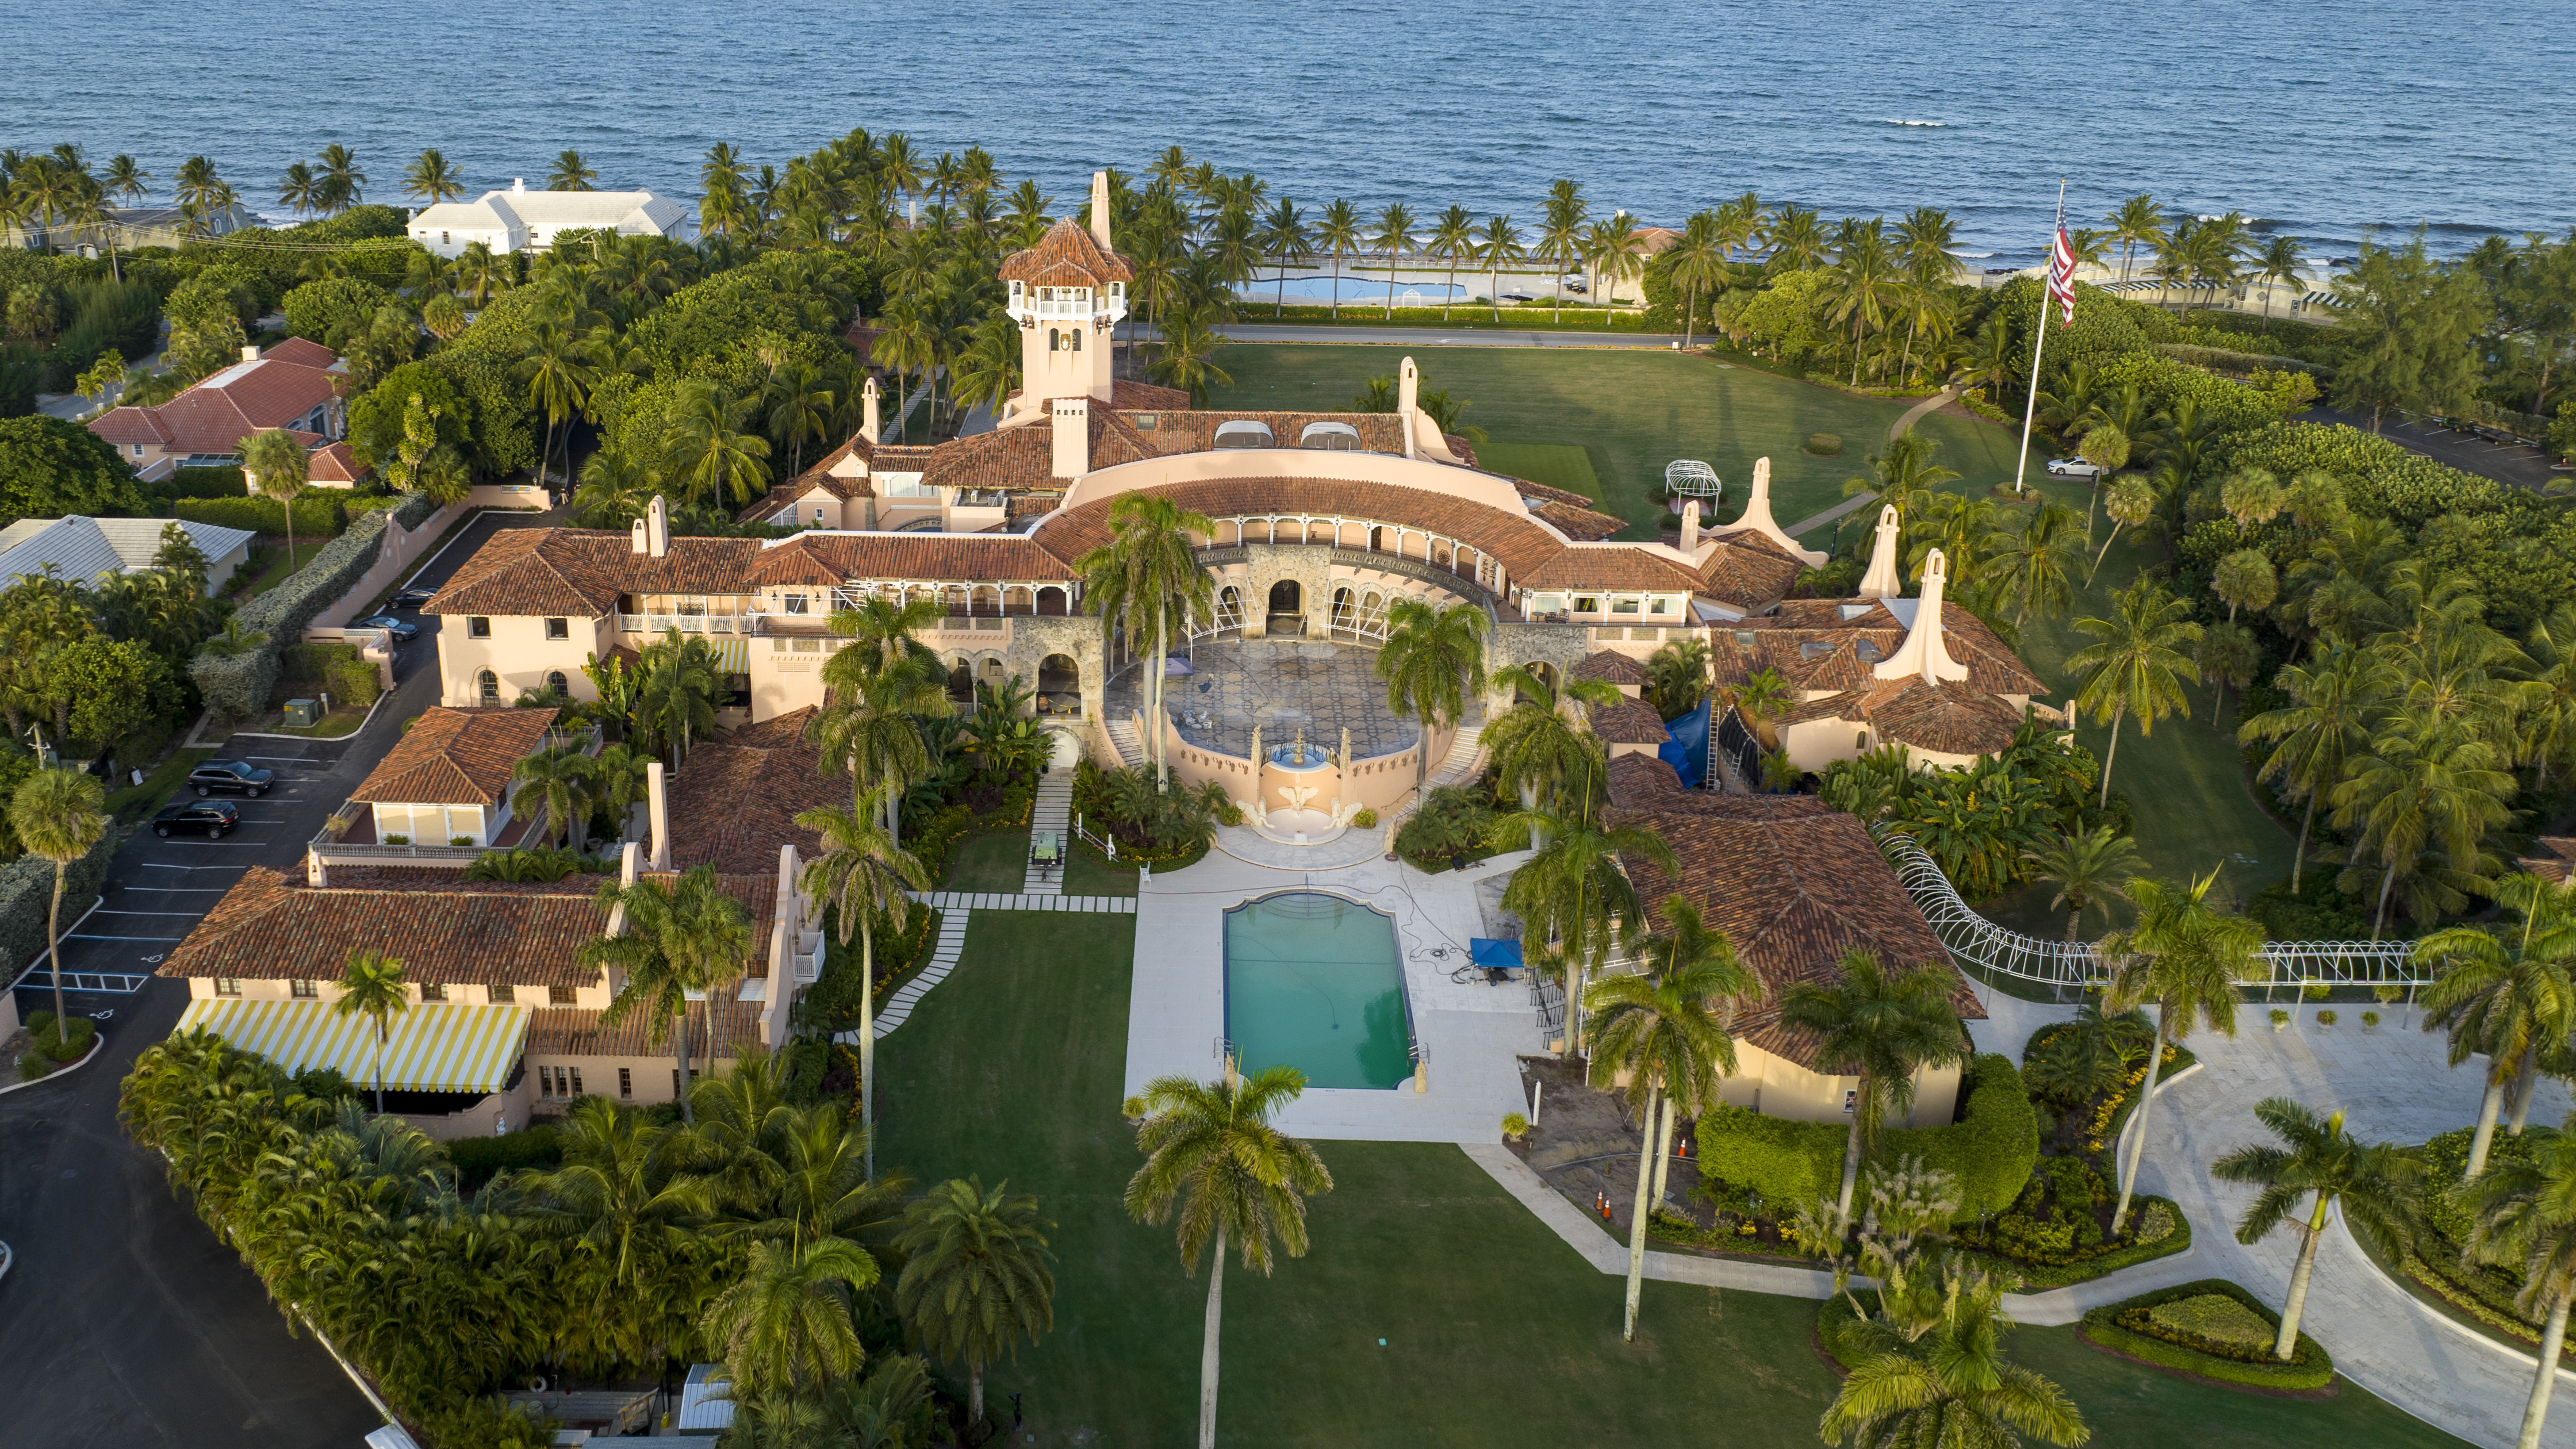 An aerial view of President Donald Trump's Mar-a-Lago estate is seen Wednesday, Aug. 10, 2022, in Palm Beach, Fla. The FBI searched Trump's Mar-a-Lago estate as part of an investigation into whether he took classified records from the White House to his Florida residence, people familiar with the matter said Monday. (AP Photo/Steve Helber)